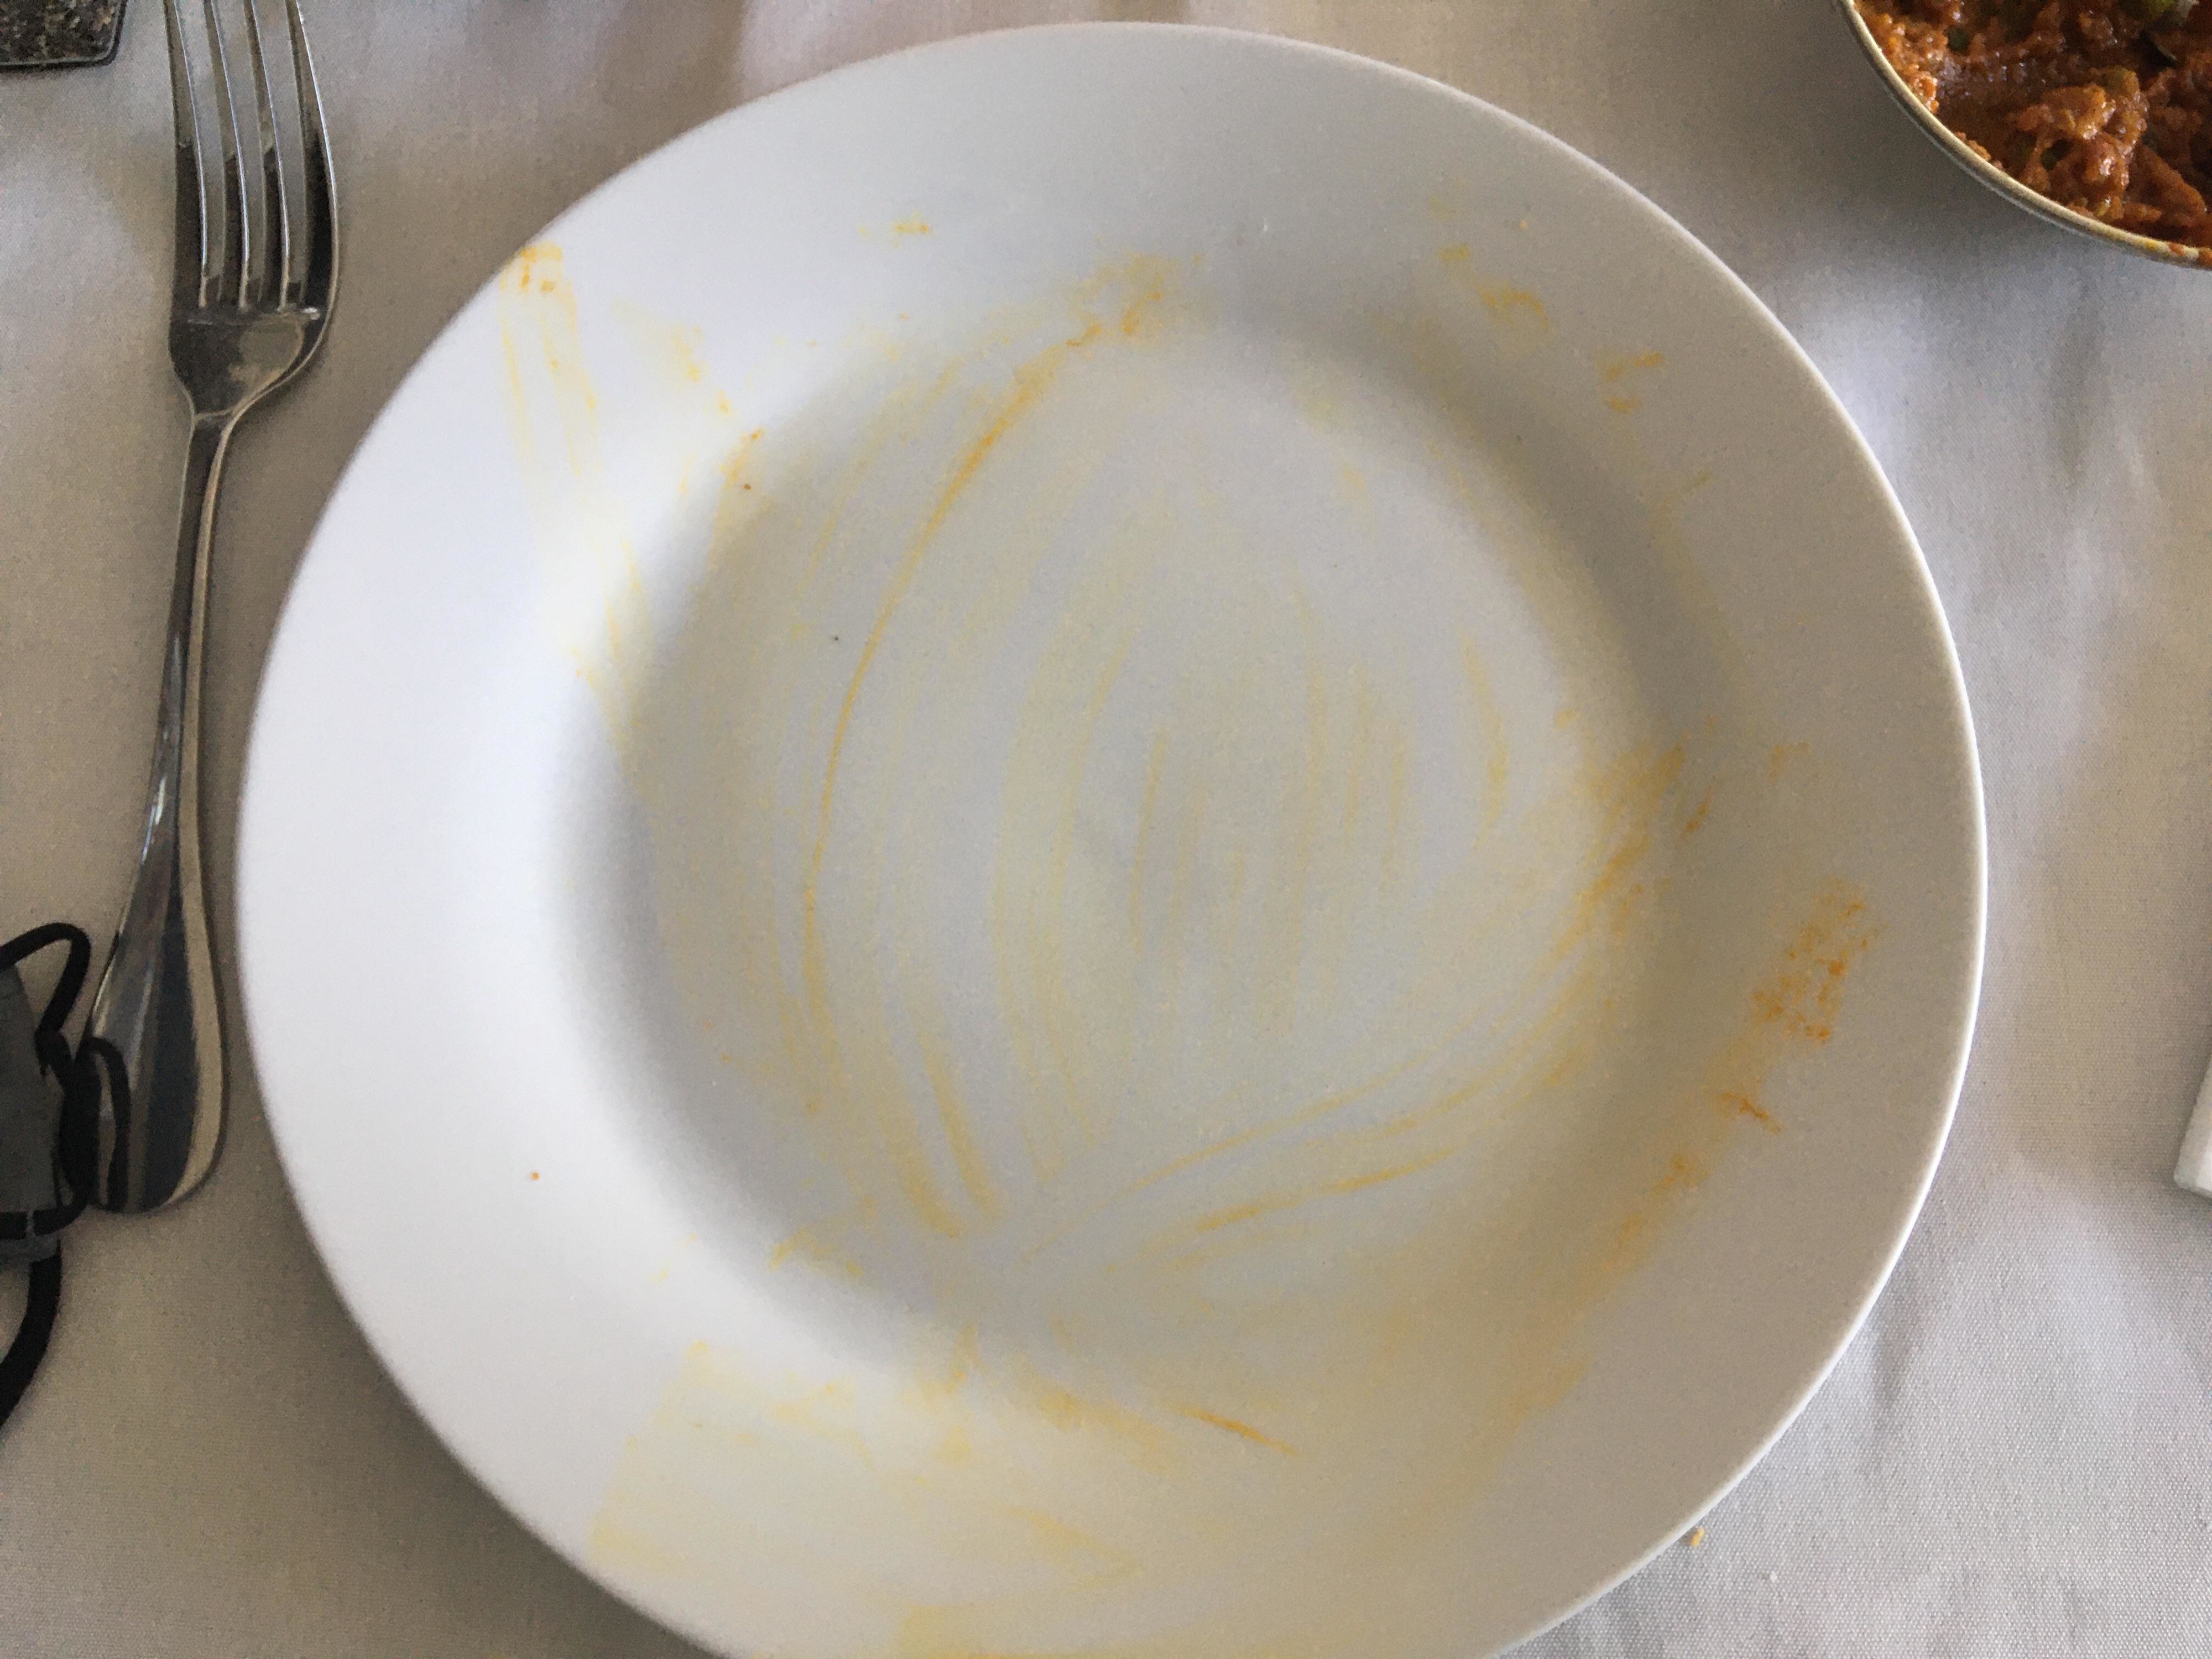 An empty plate with streaks of food residue still on it